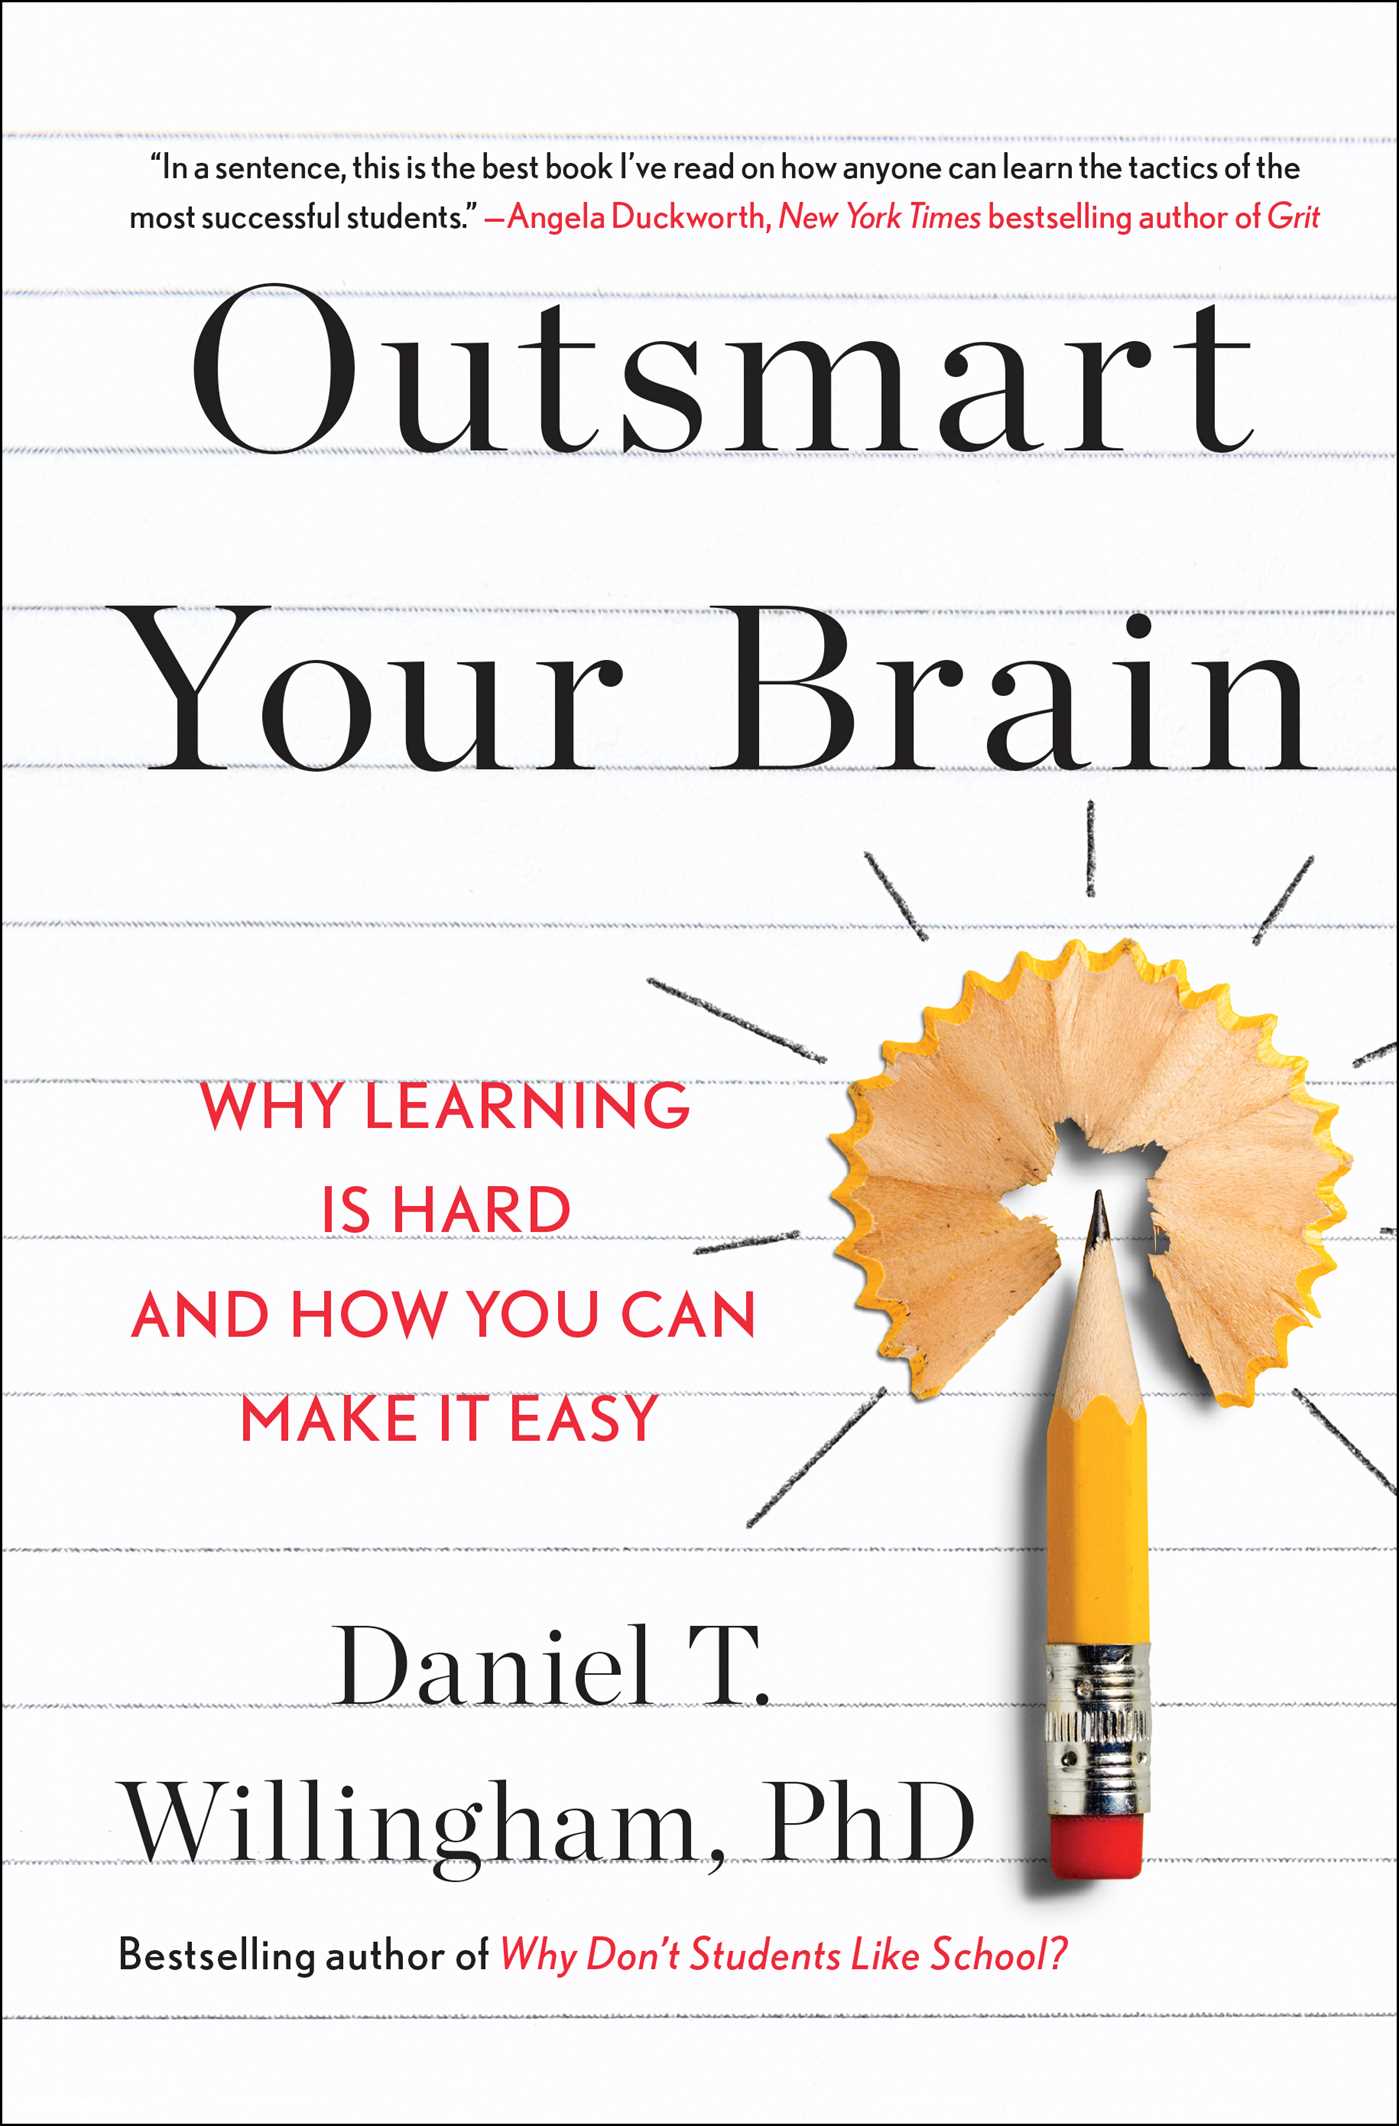 Outsmart Your Brain : Why Learning is Hard and How You Can Make It Easy | Psychology & Self-Improvement